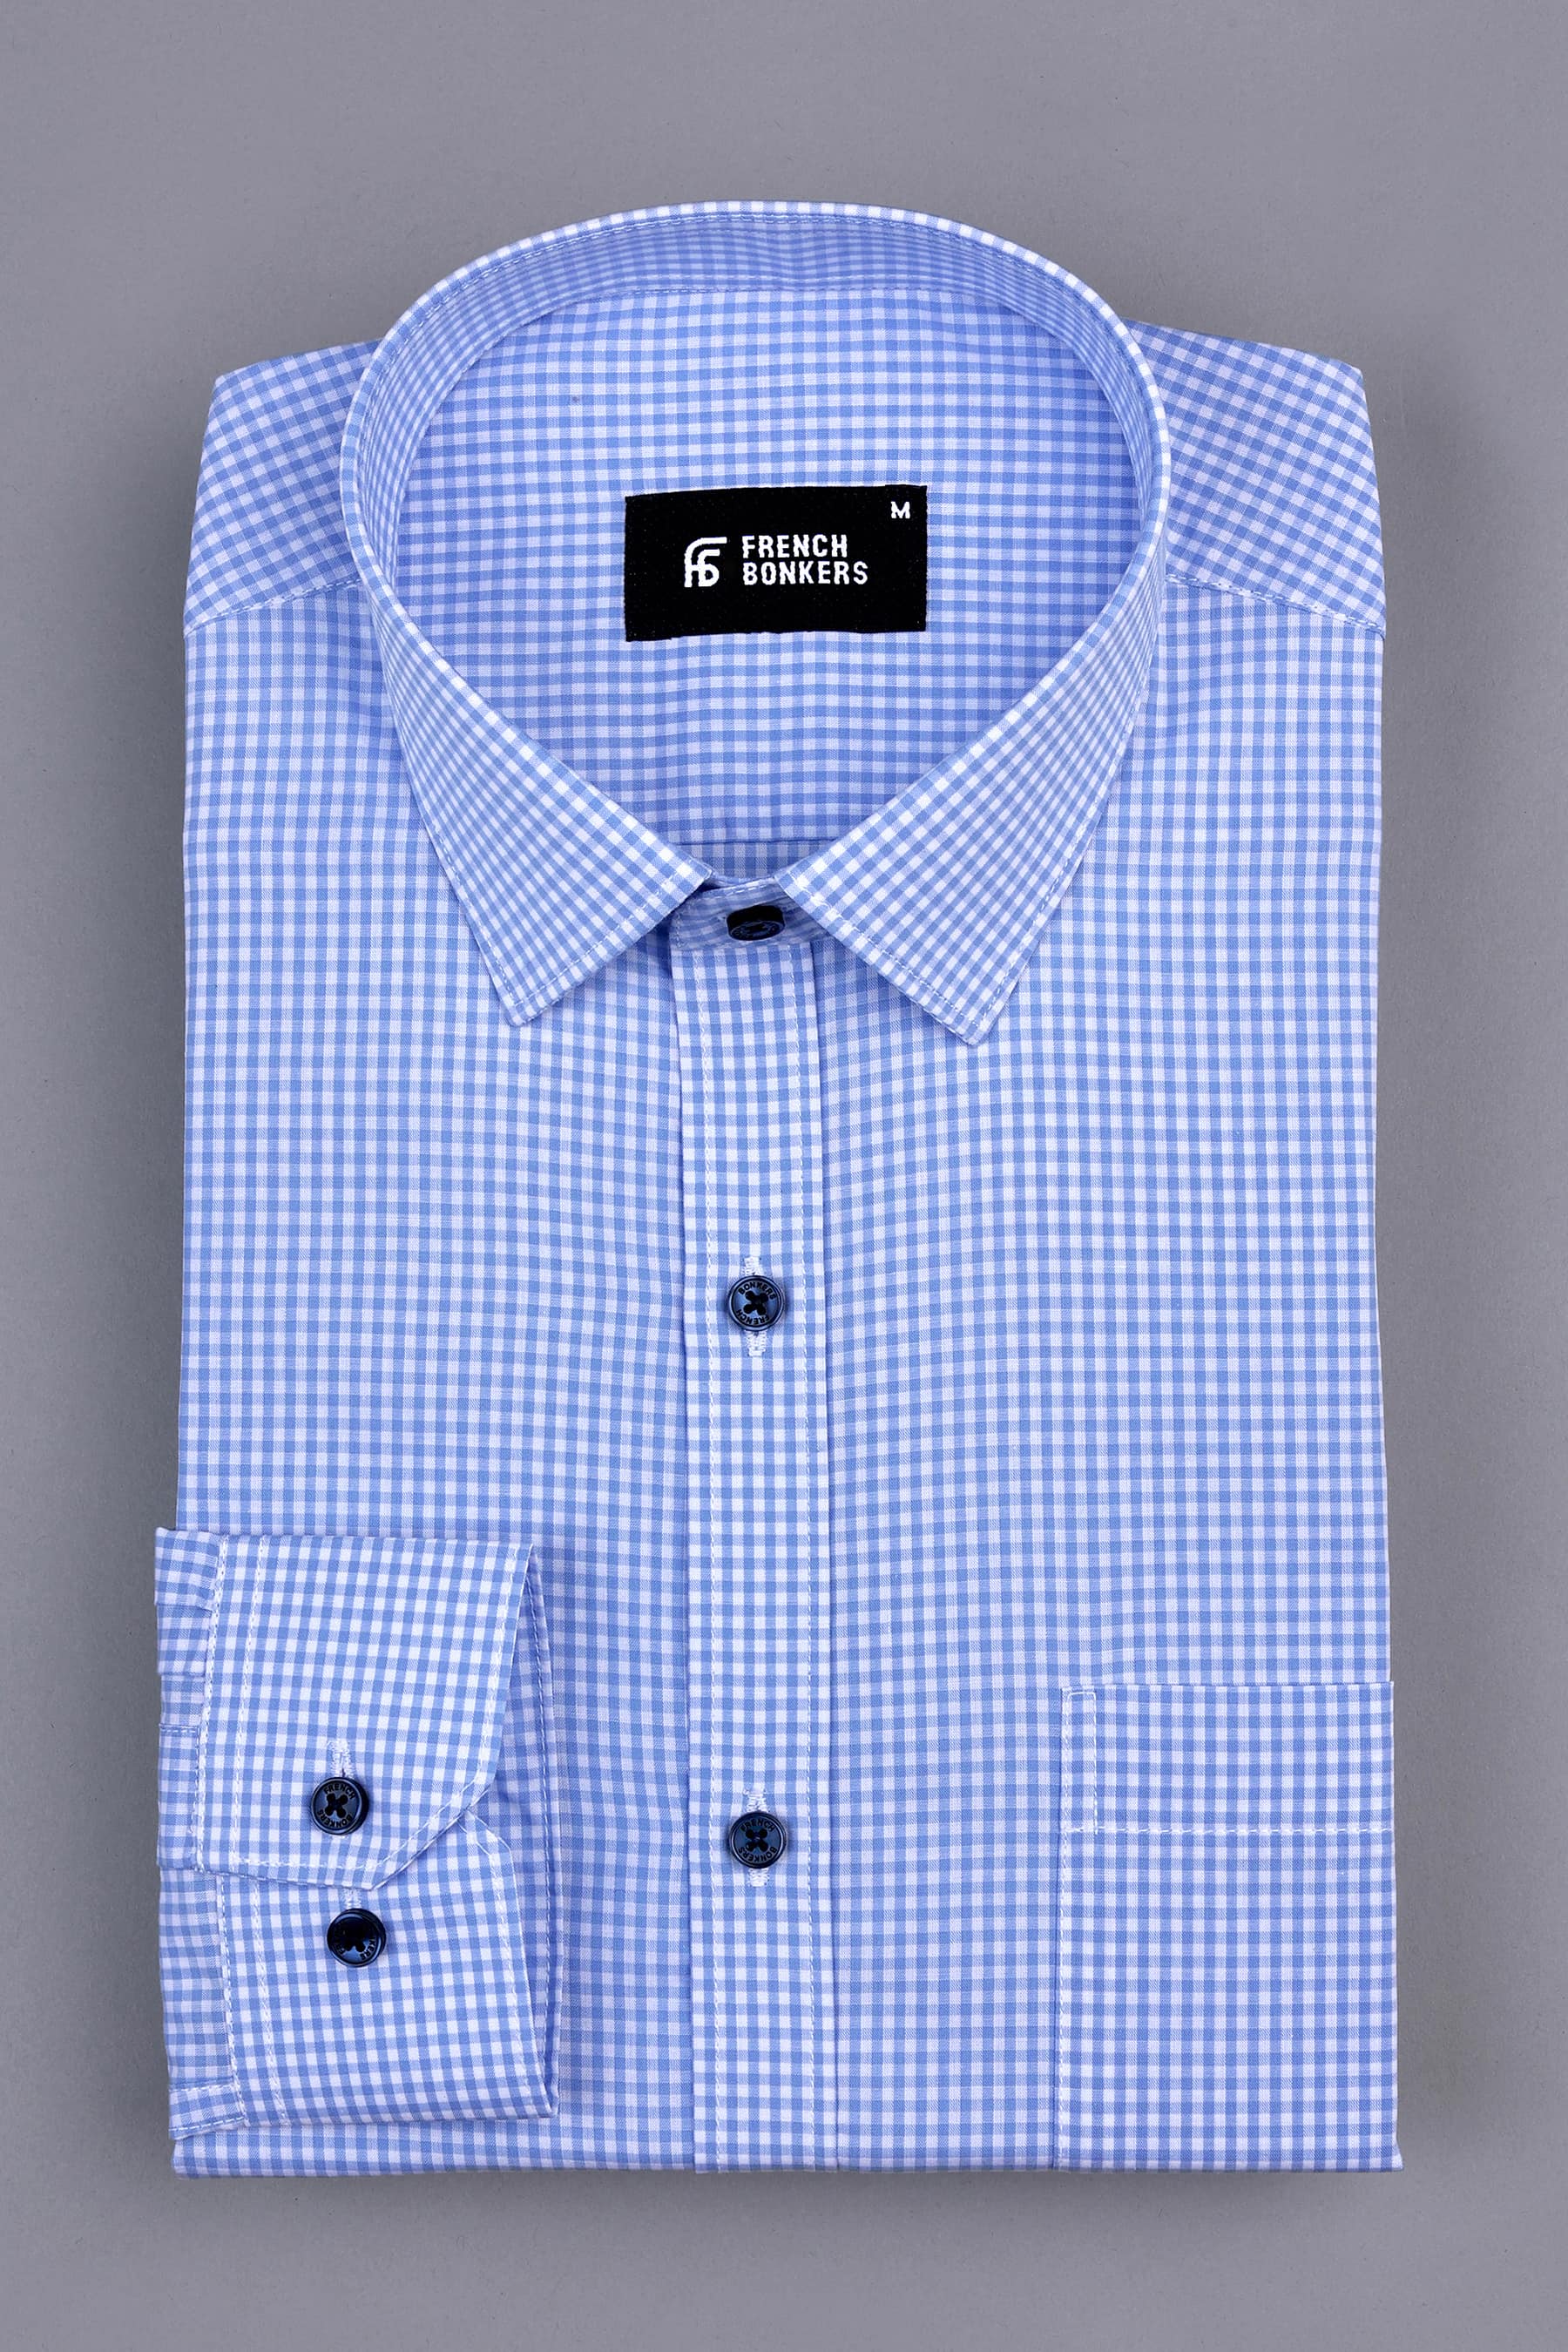 Light sky blue with white pin check  cotton shirt